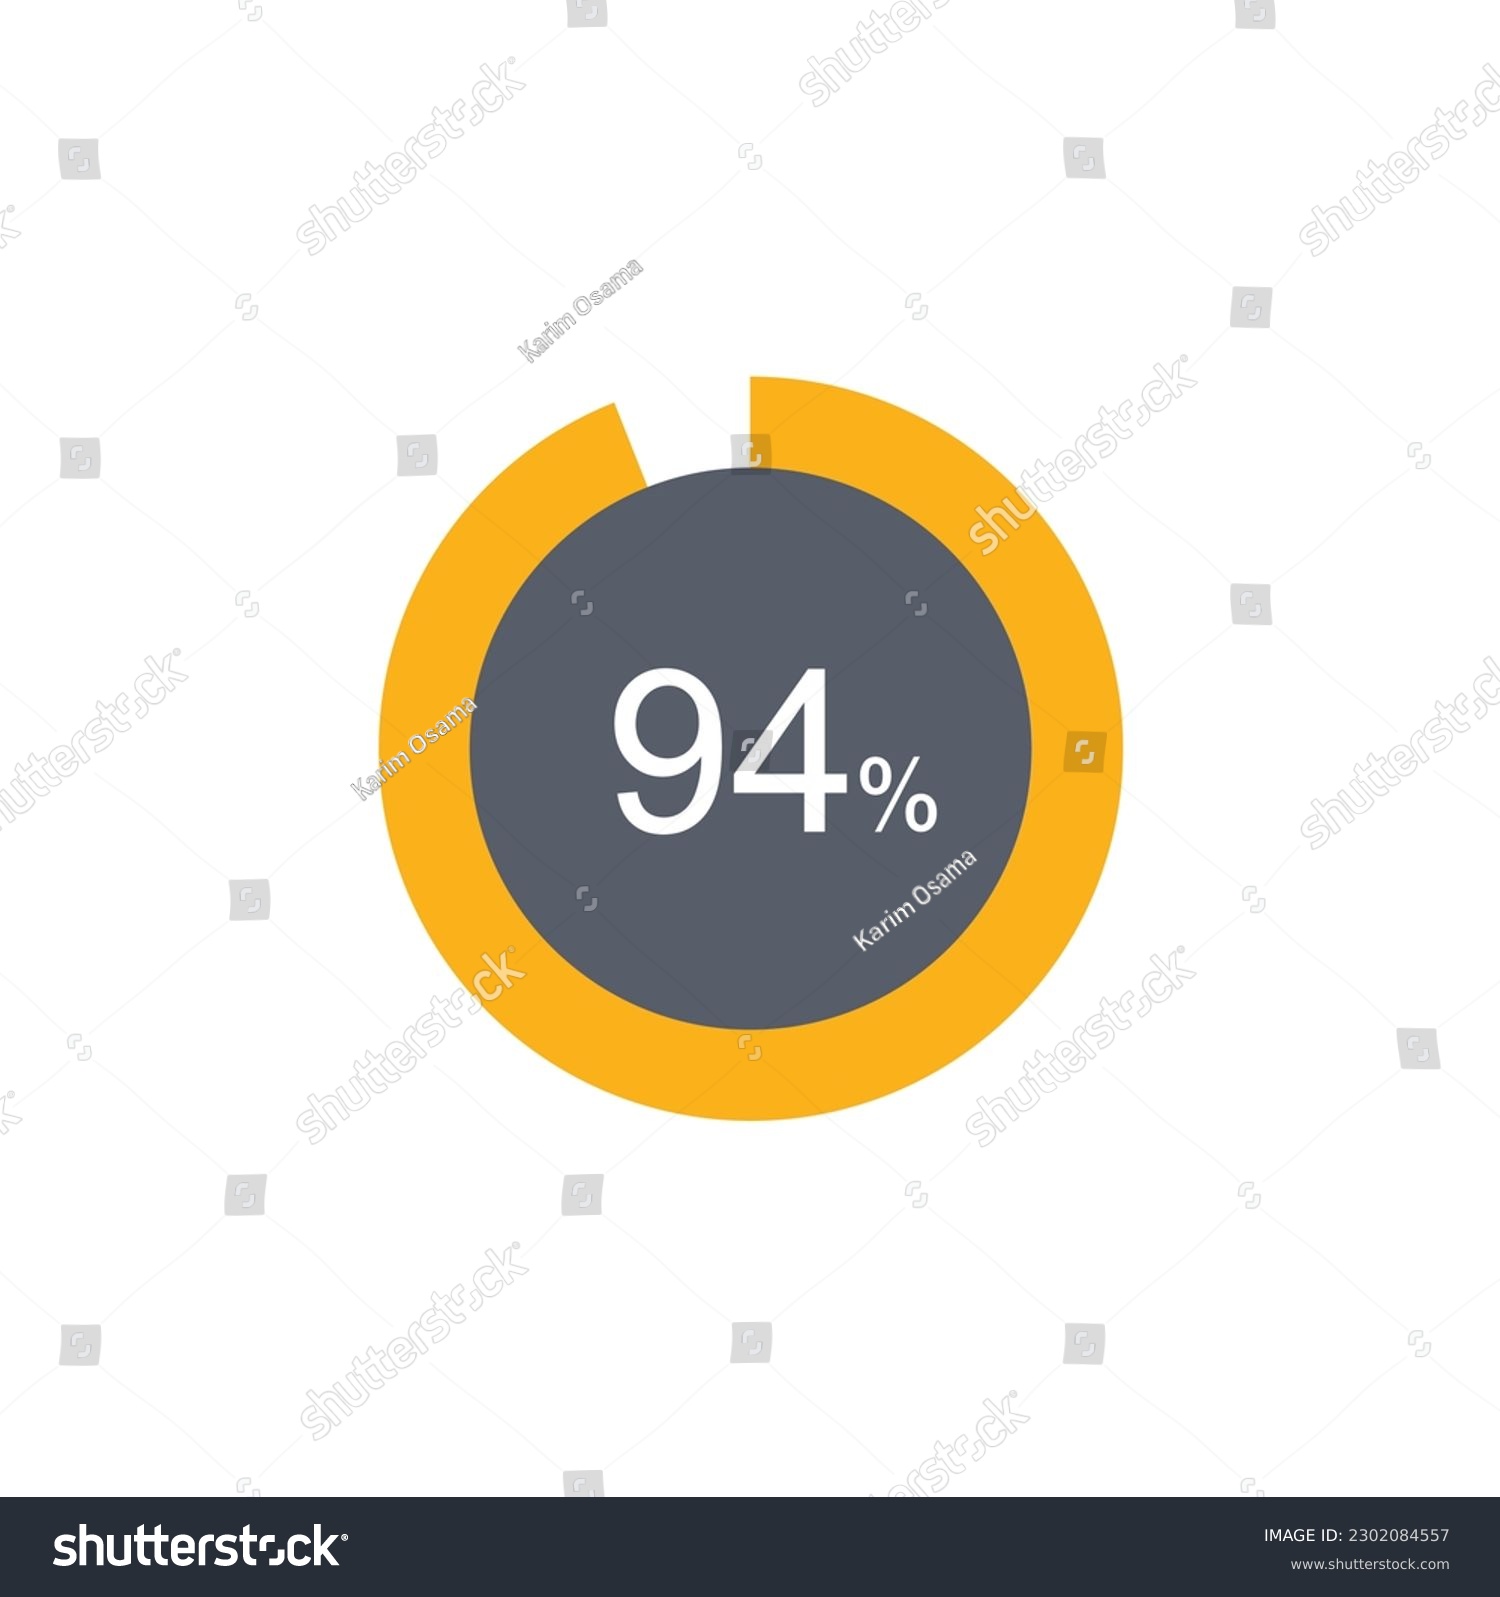 SVG of 94% percentage infographic circle icons,94 percents pie chart infographic elements for Illustration, business, web design. svg